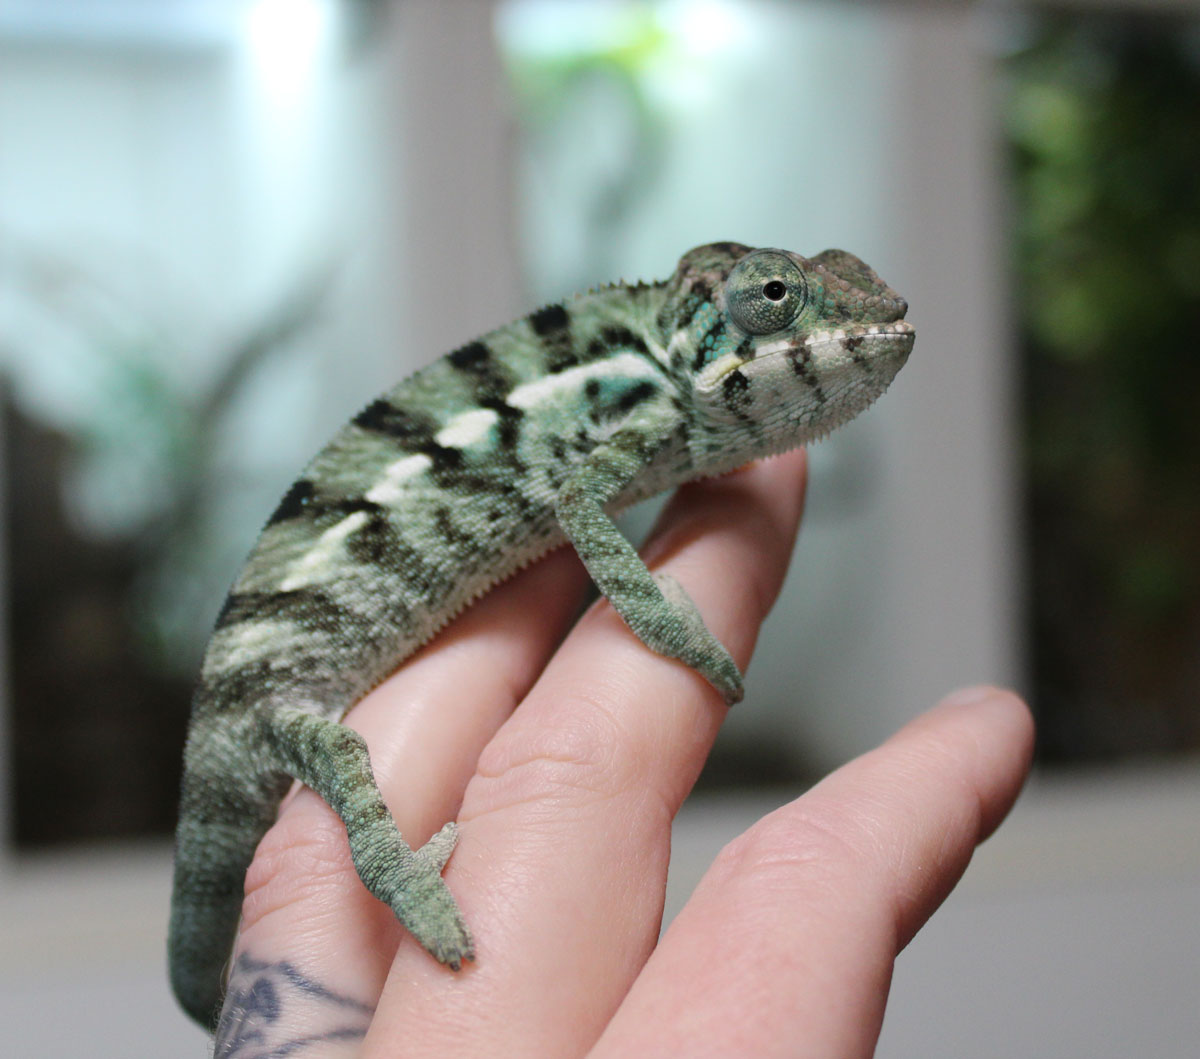 Male Nosy be Panther Chameleon For Sale